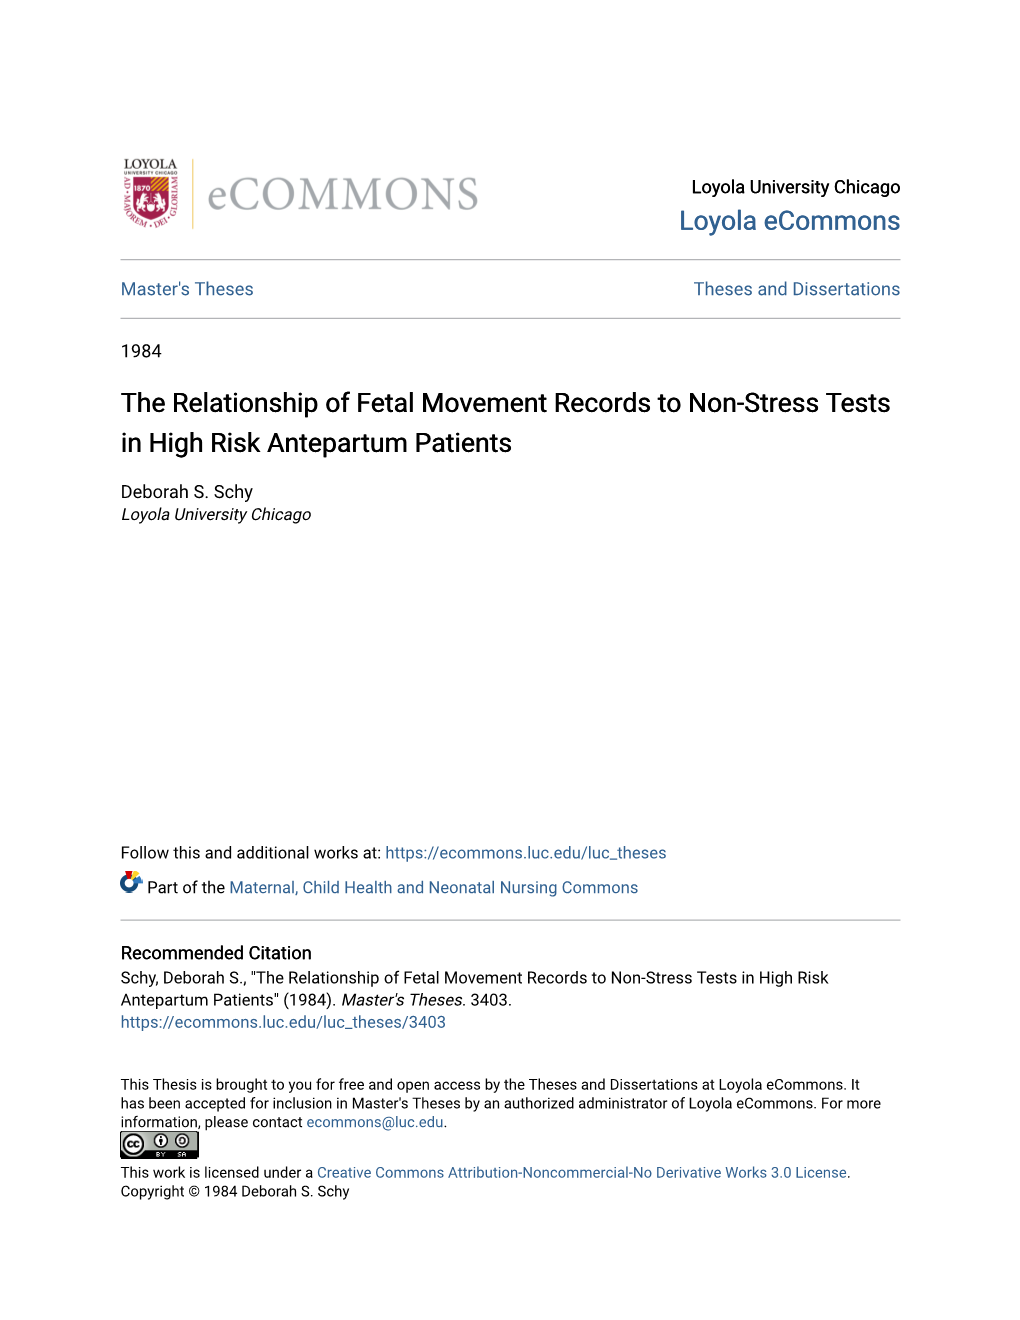 The Relationship of Fetal Movement Records to Non-Stress Tests in High Risk Antepartum Patients